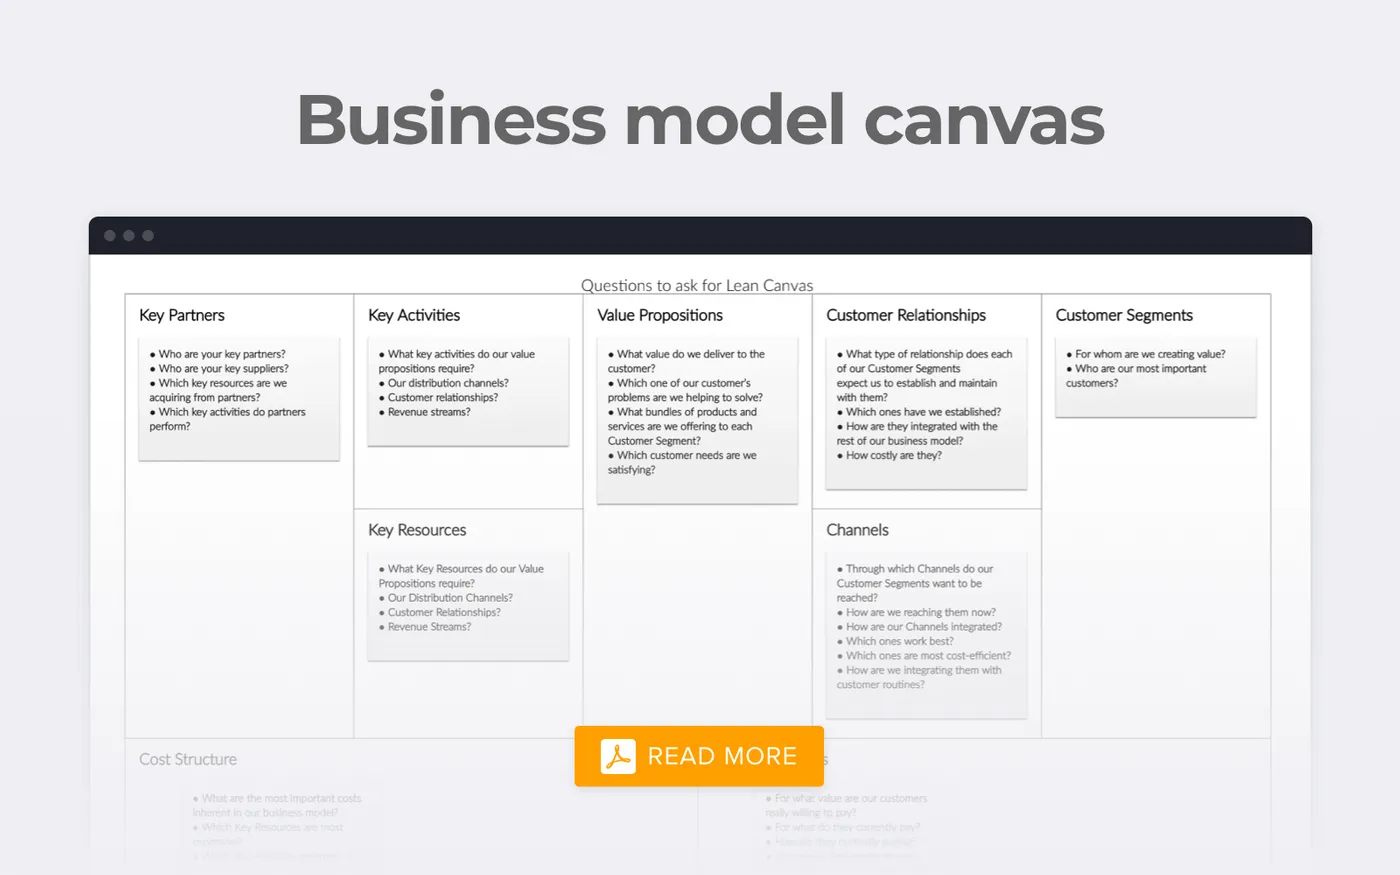 An example of business model canvas